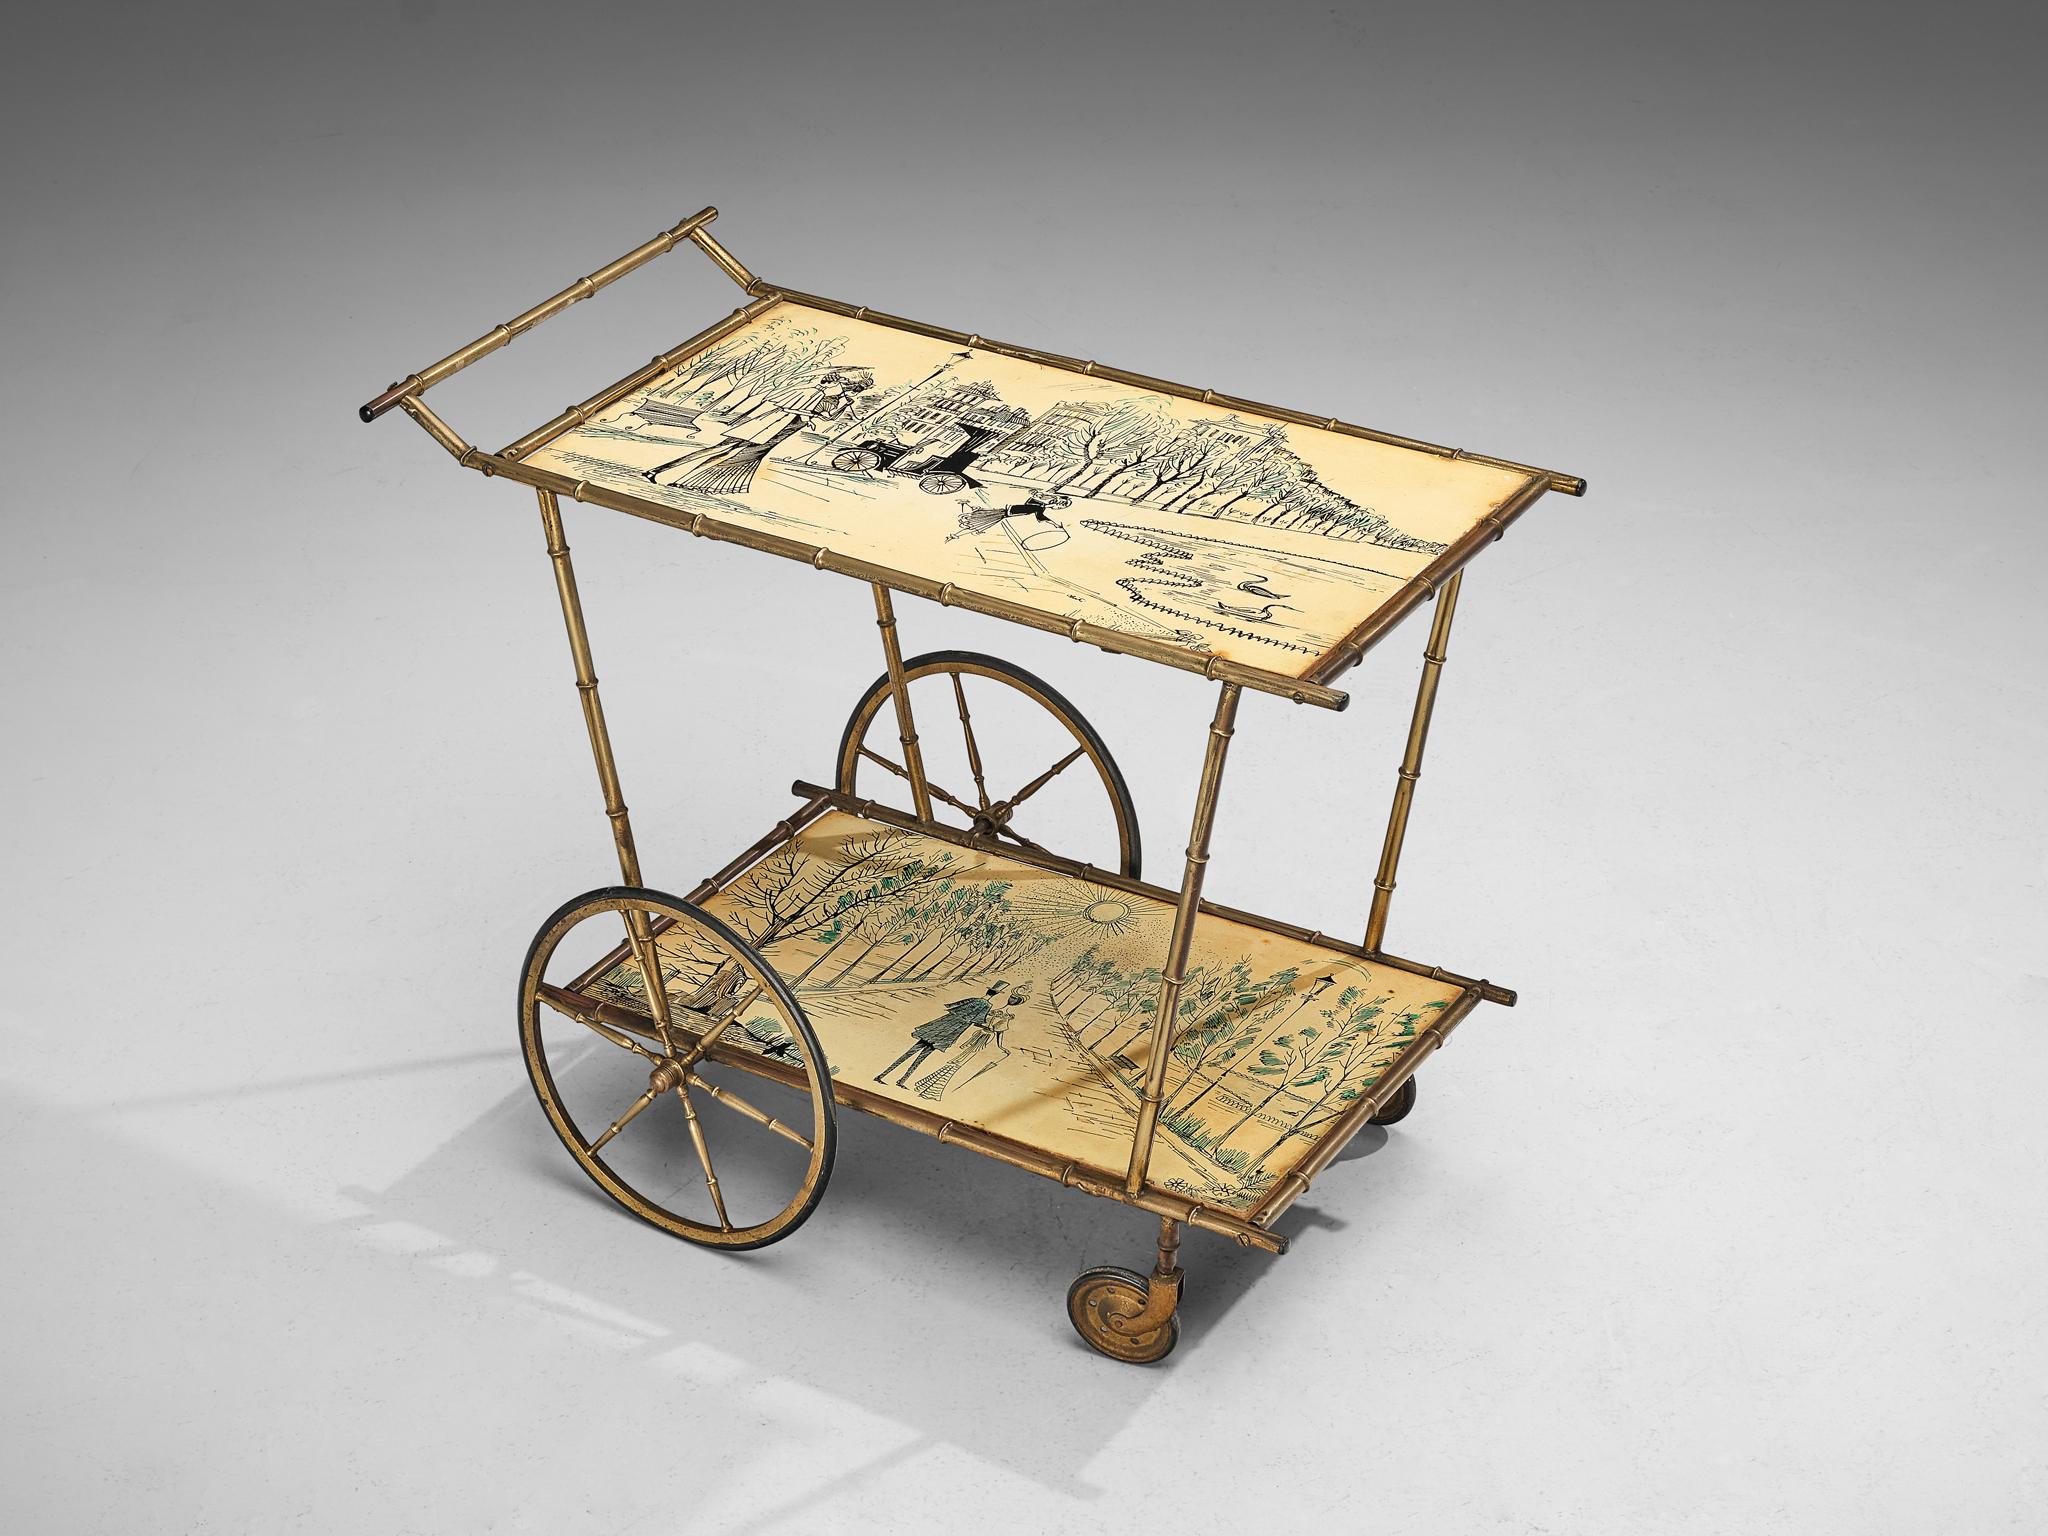 Bamboo bar cart of trolley, brass, metal, Europe, 1960s

Charming bar cart made in Europe in the 1960s. This piece is made in brass, that displays a bamboo-like frame. Within this design there is a charming appearance created by the use of decorated